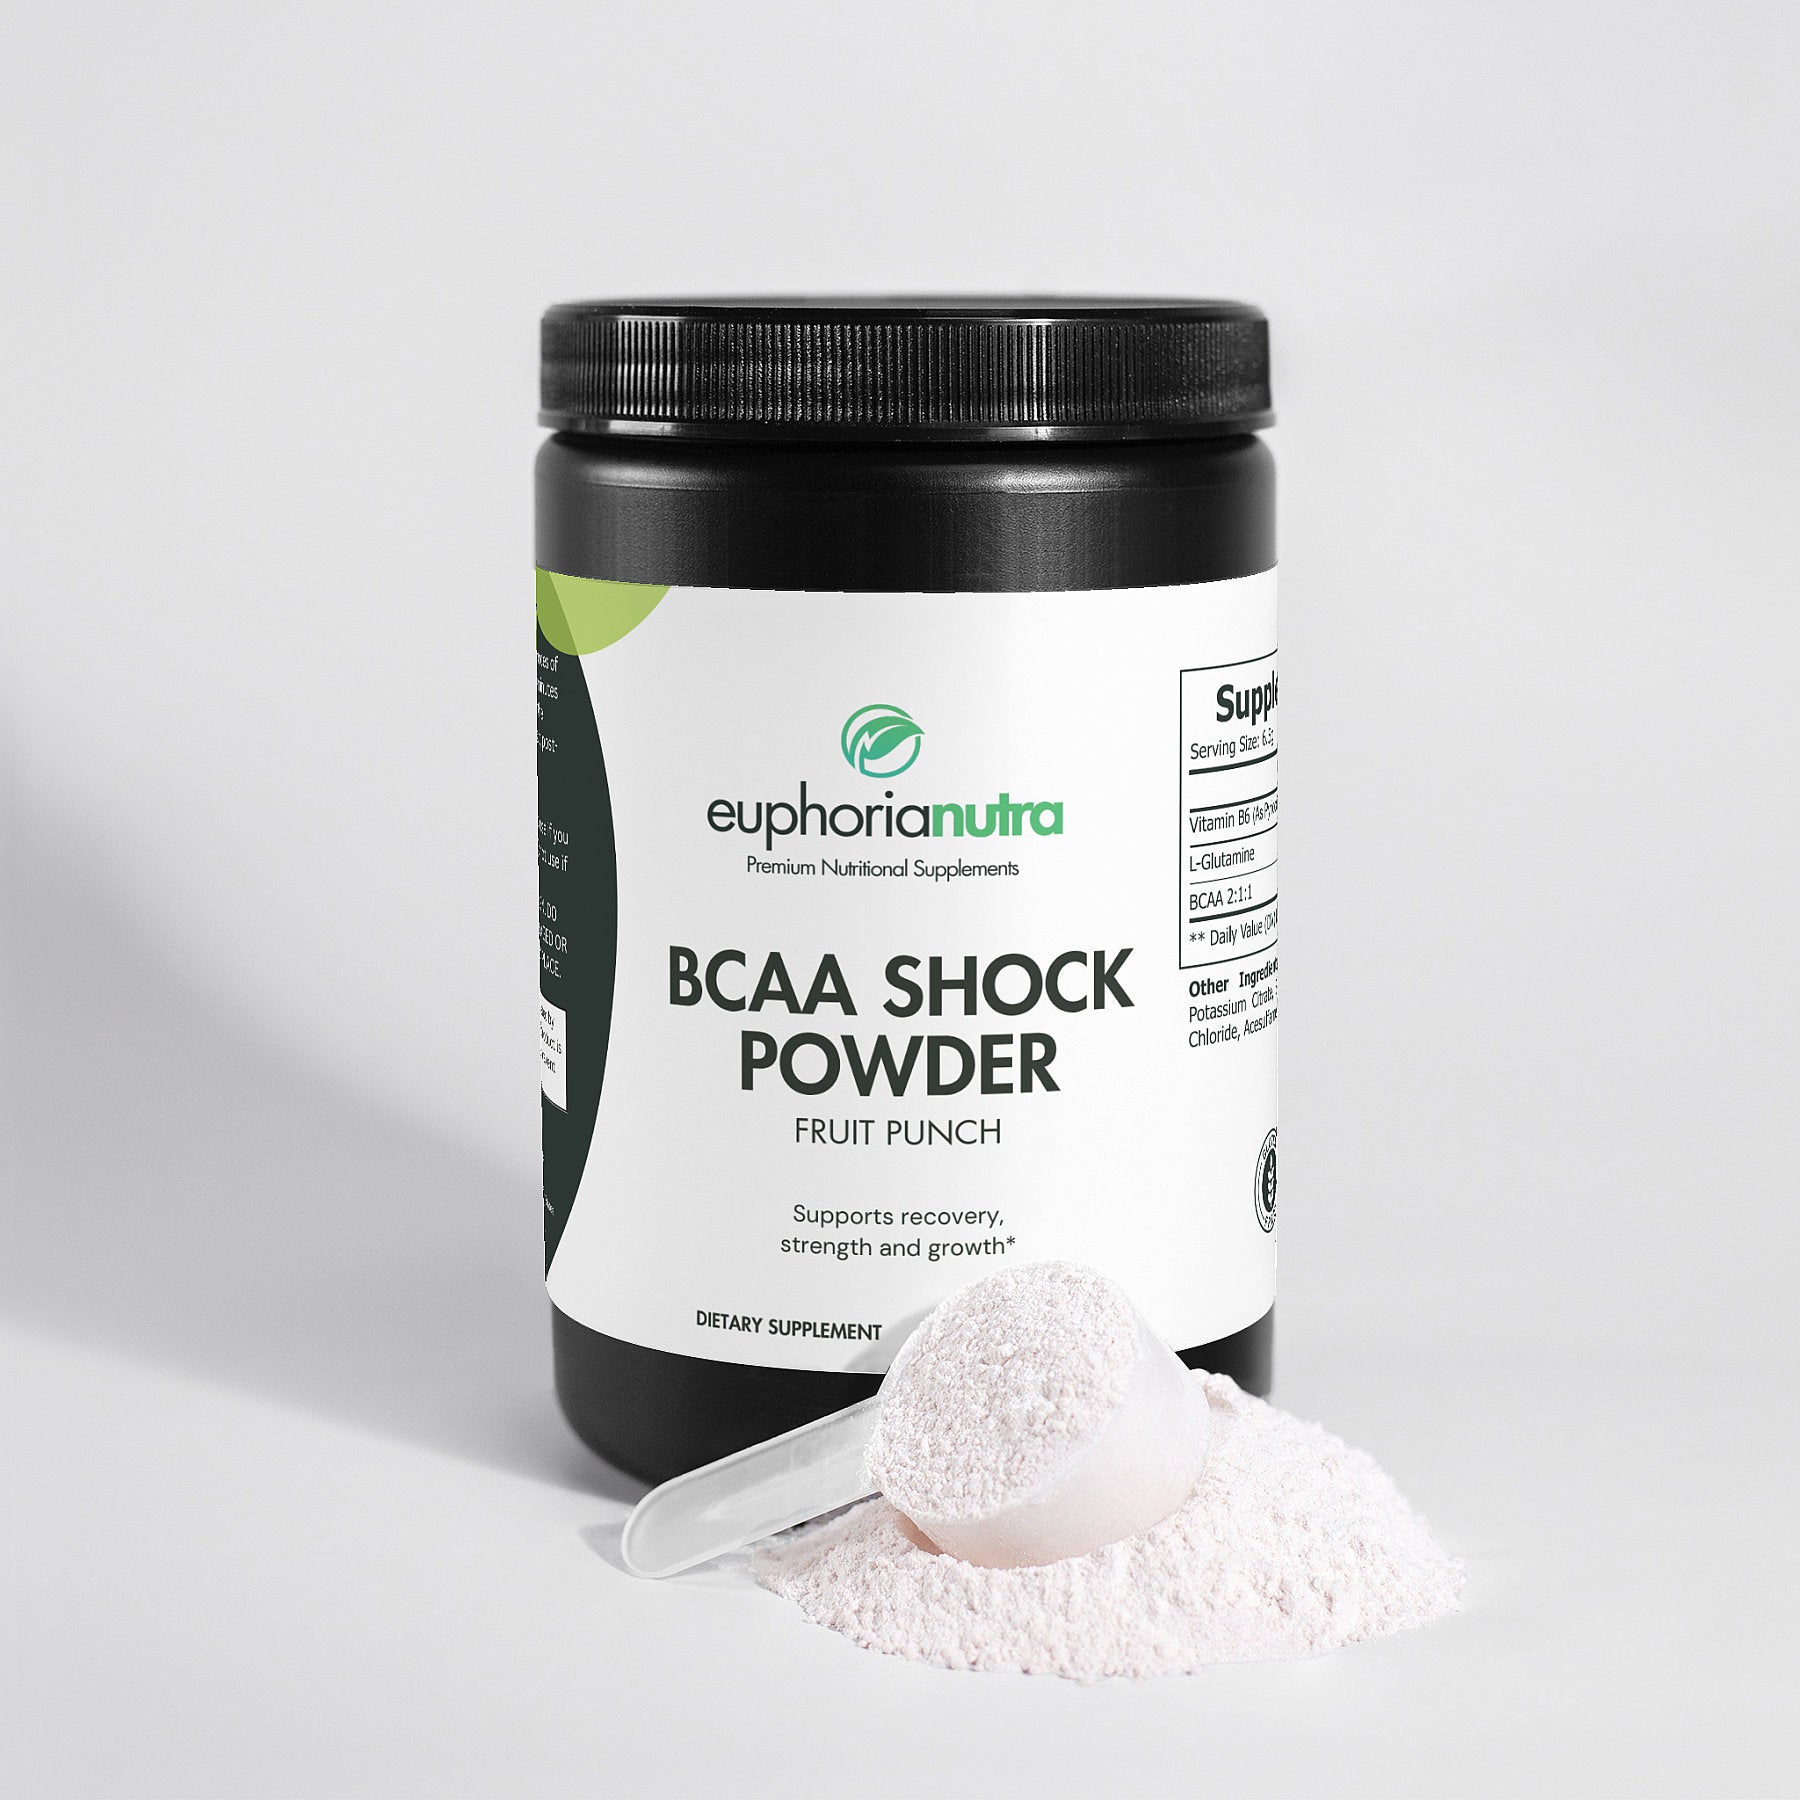 Premium BCAA Post Workout Powder - Lean Muscle Recovery & Growth